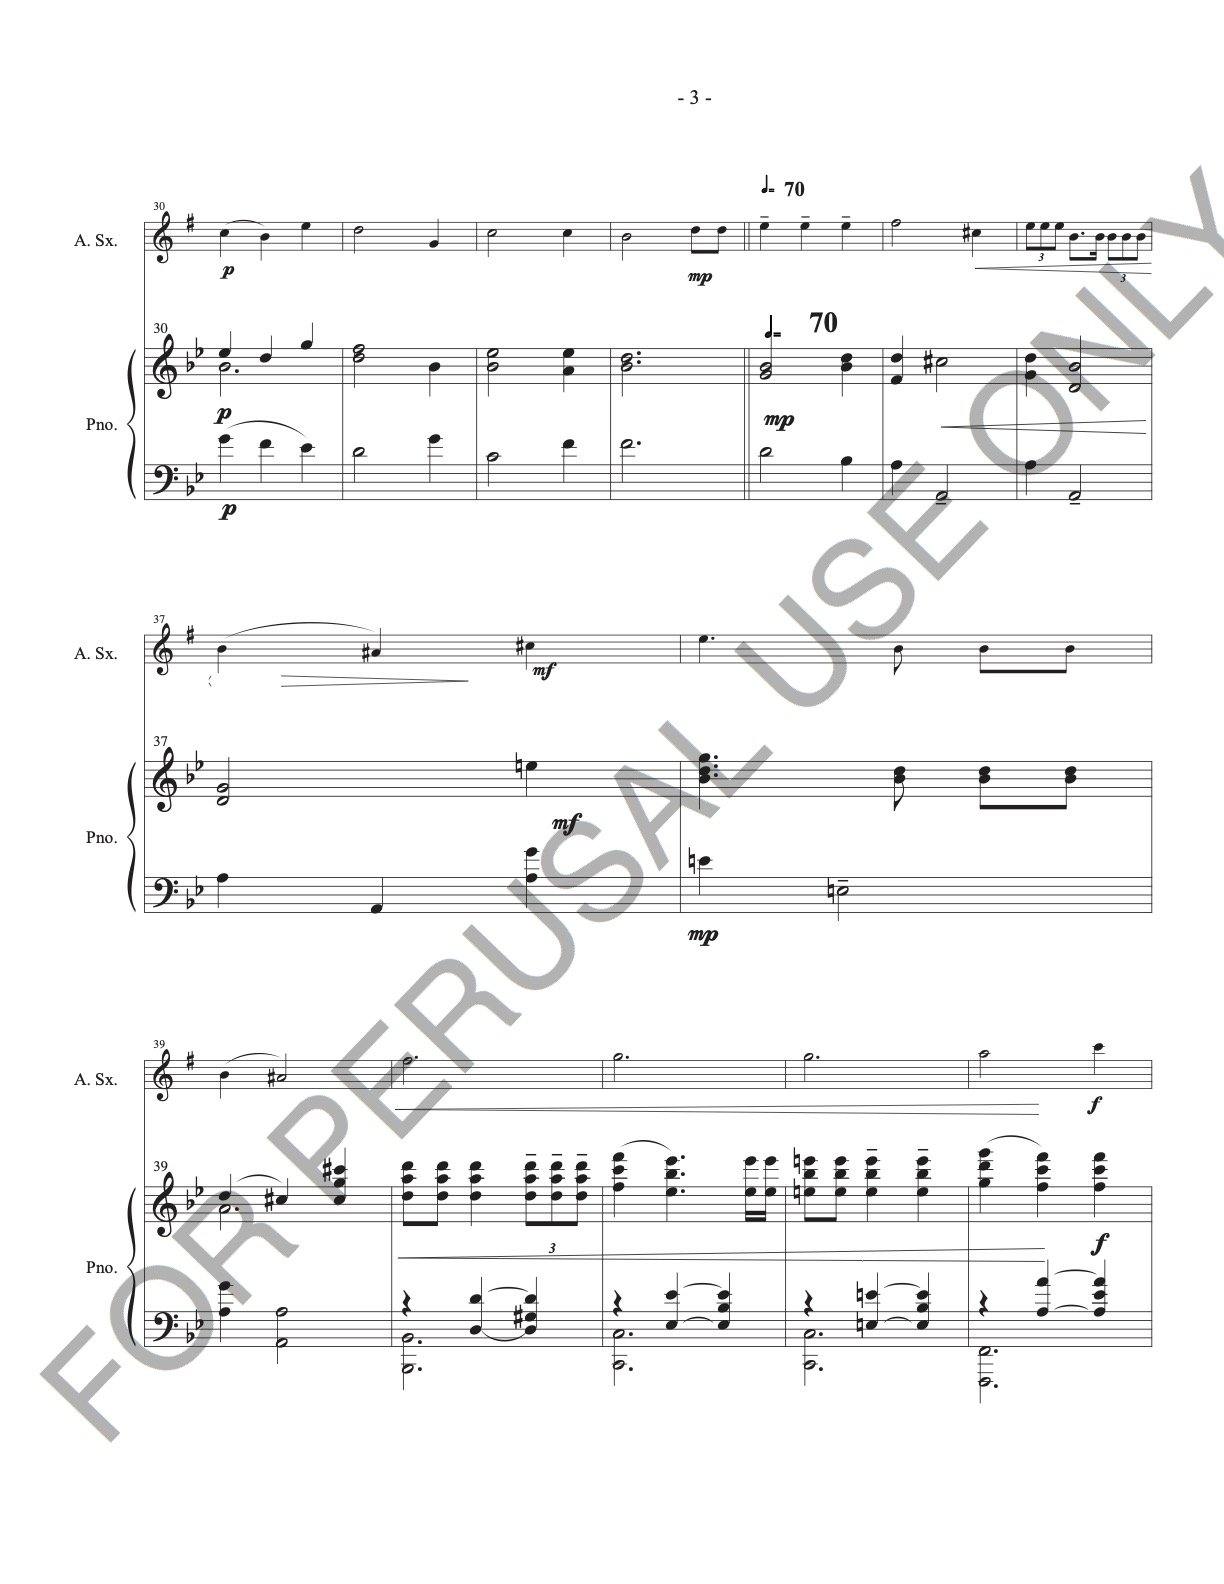 The Lord’s Prayer for Alto Saxophone and Piano (score+parts) - ChaipruckMekara